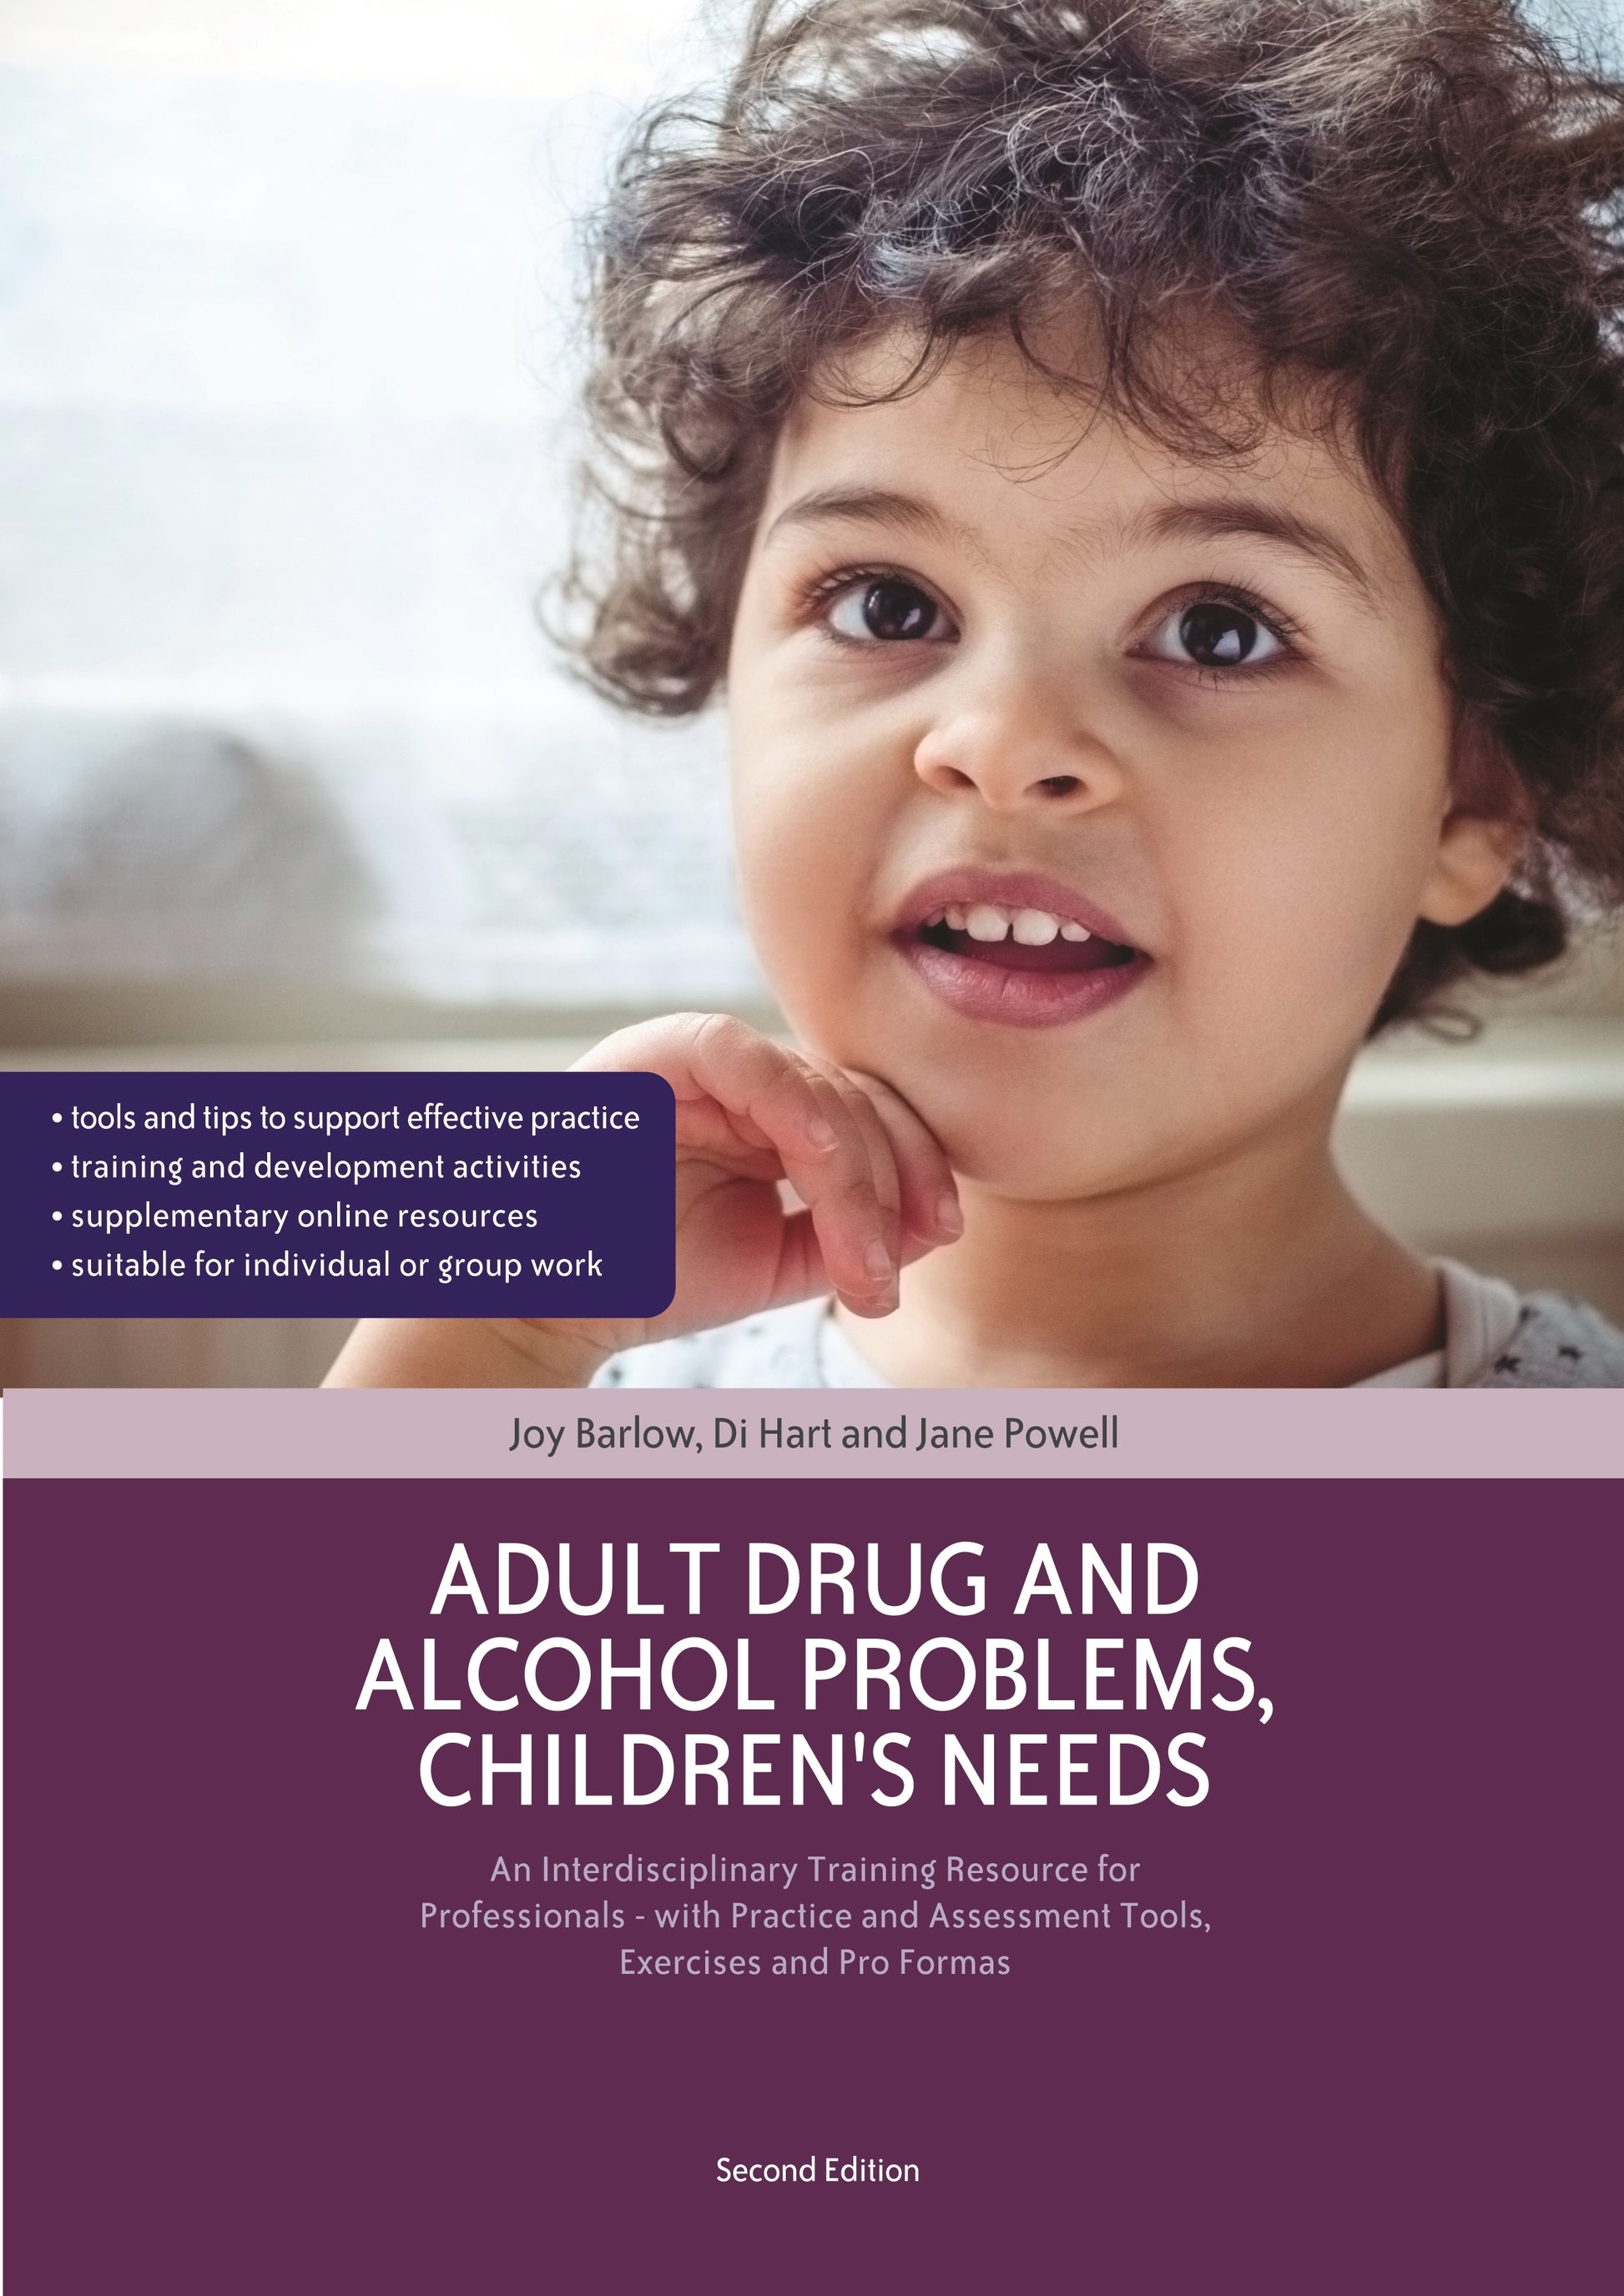 Adult Drug and Alcohol Problems, Children's Needs, Second Edition by Joy Barlow, Di Hart, Jane Powell